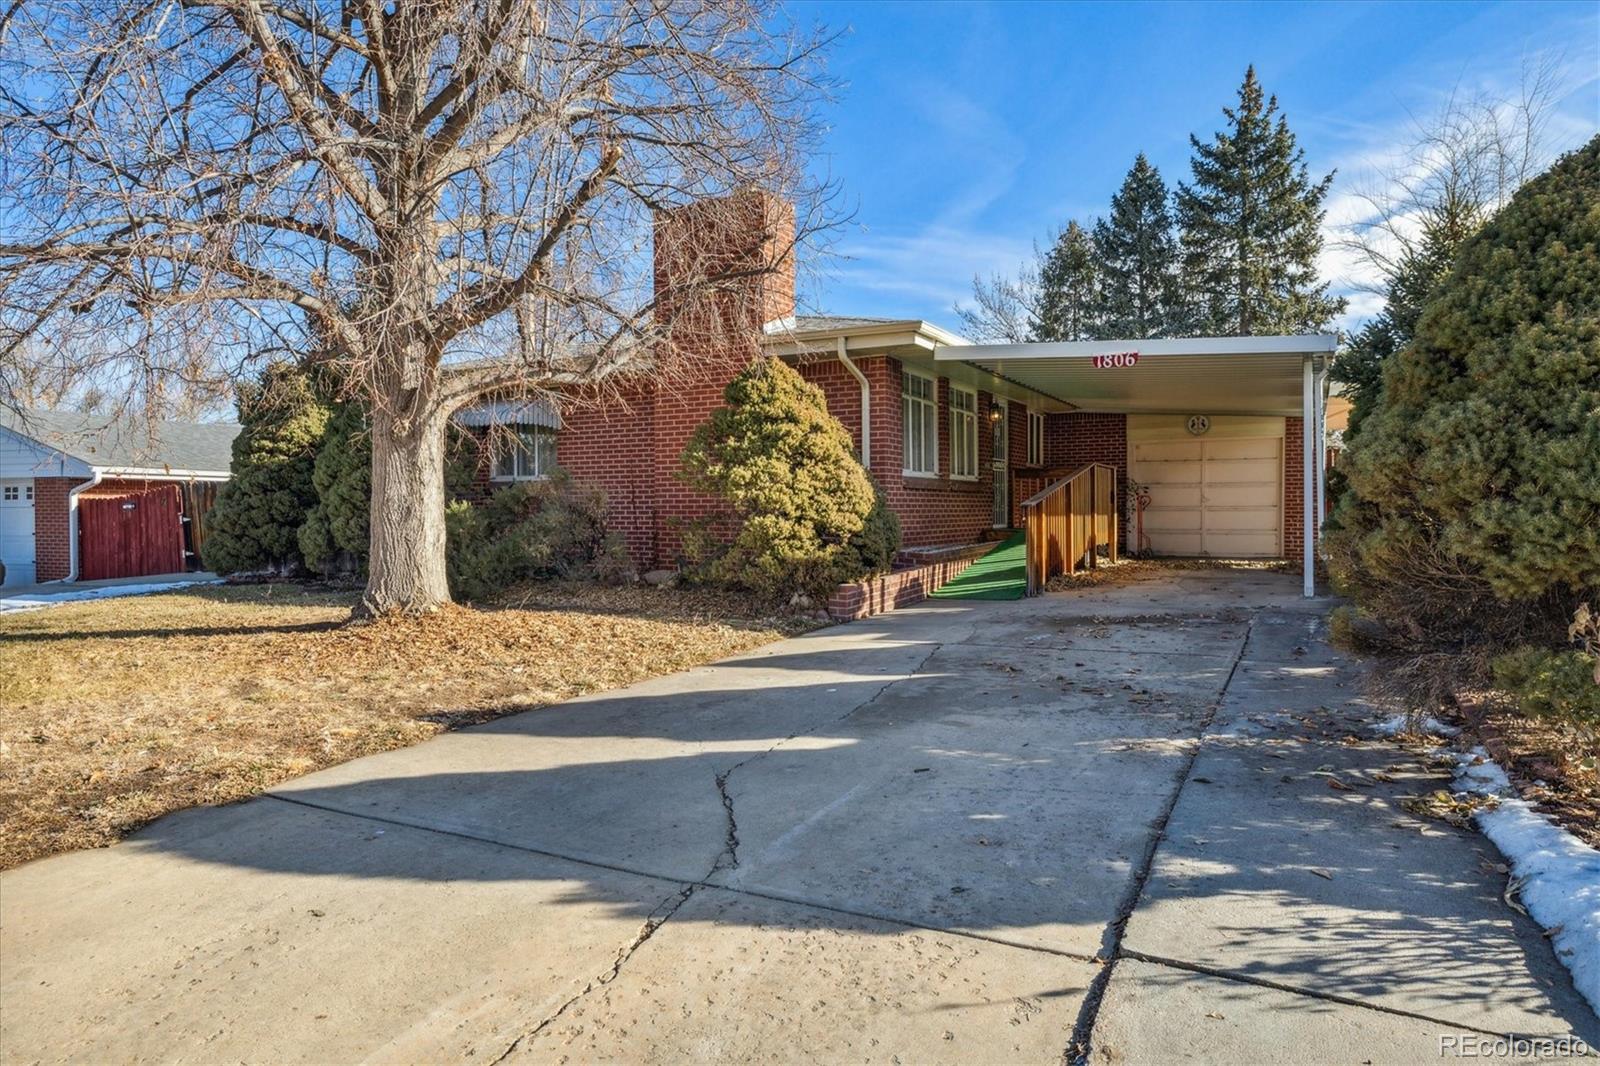 1806 s wolcott court, Denver sold home. Closed on 2024-03-14 for $515,000.